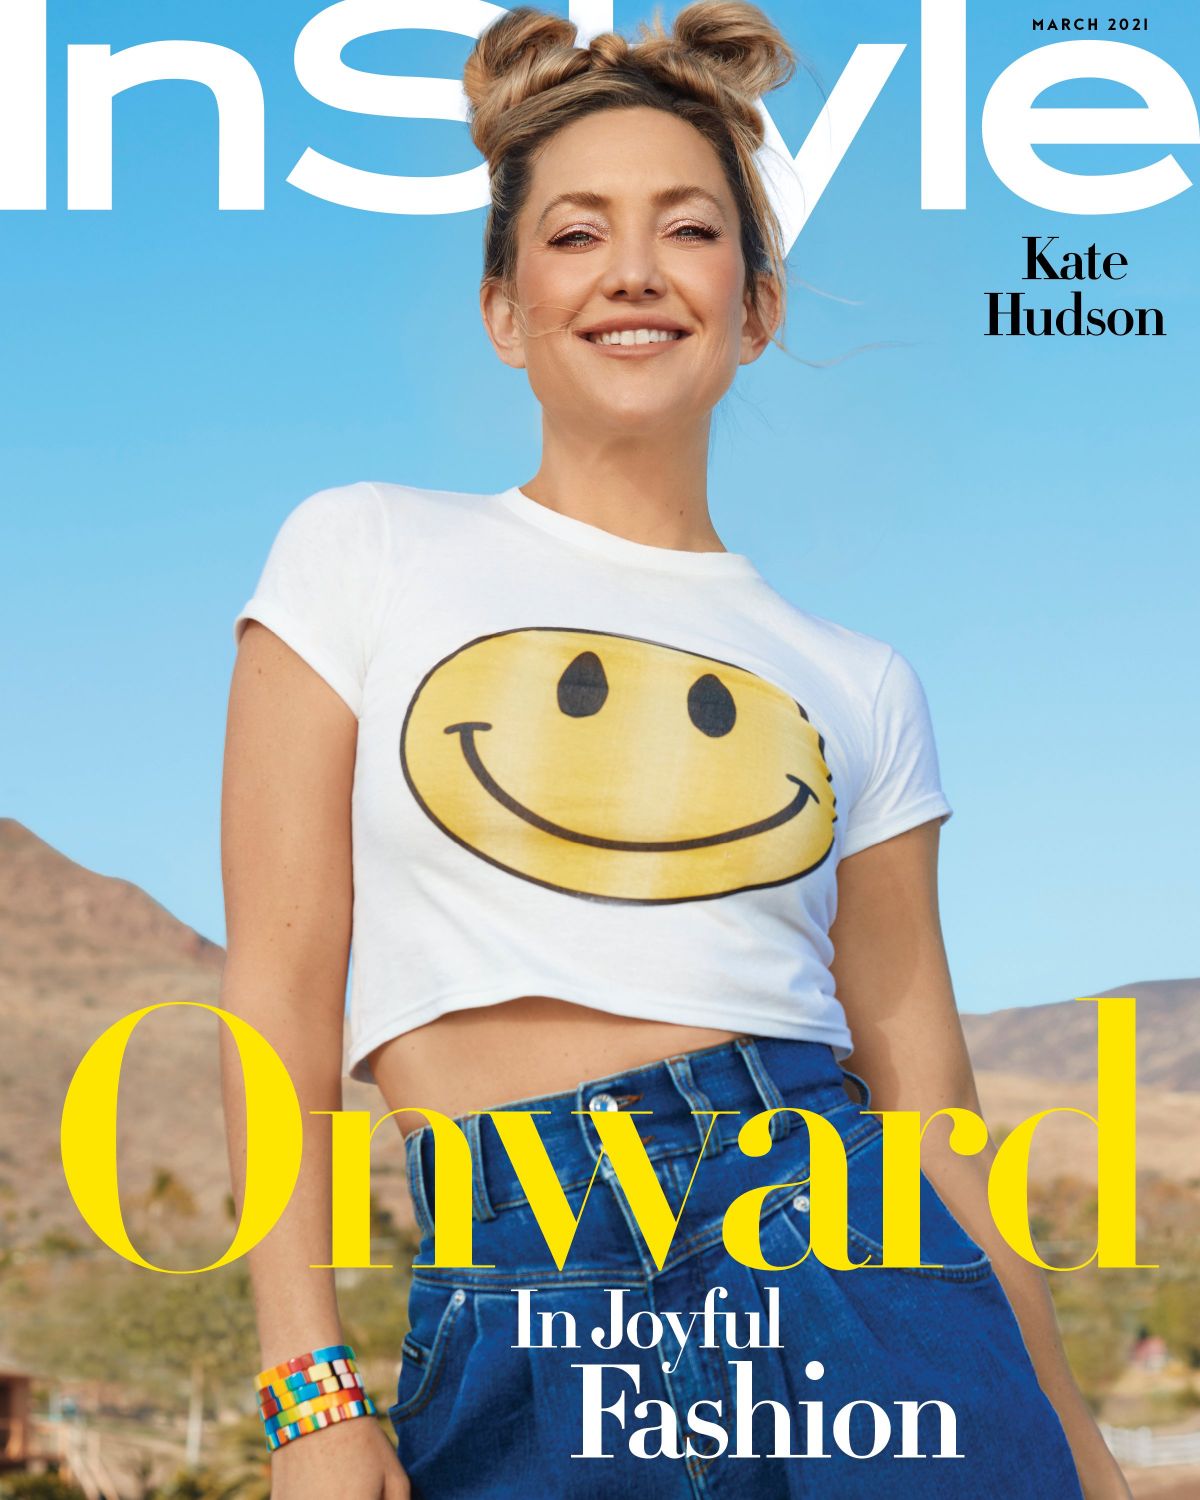 kate-hudson-for-instyle-magazine-march-2021-10.jpg